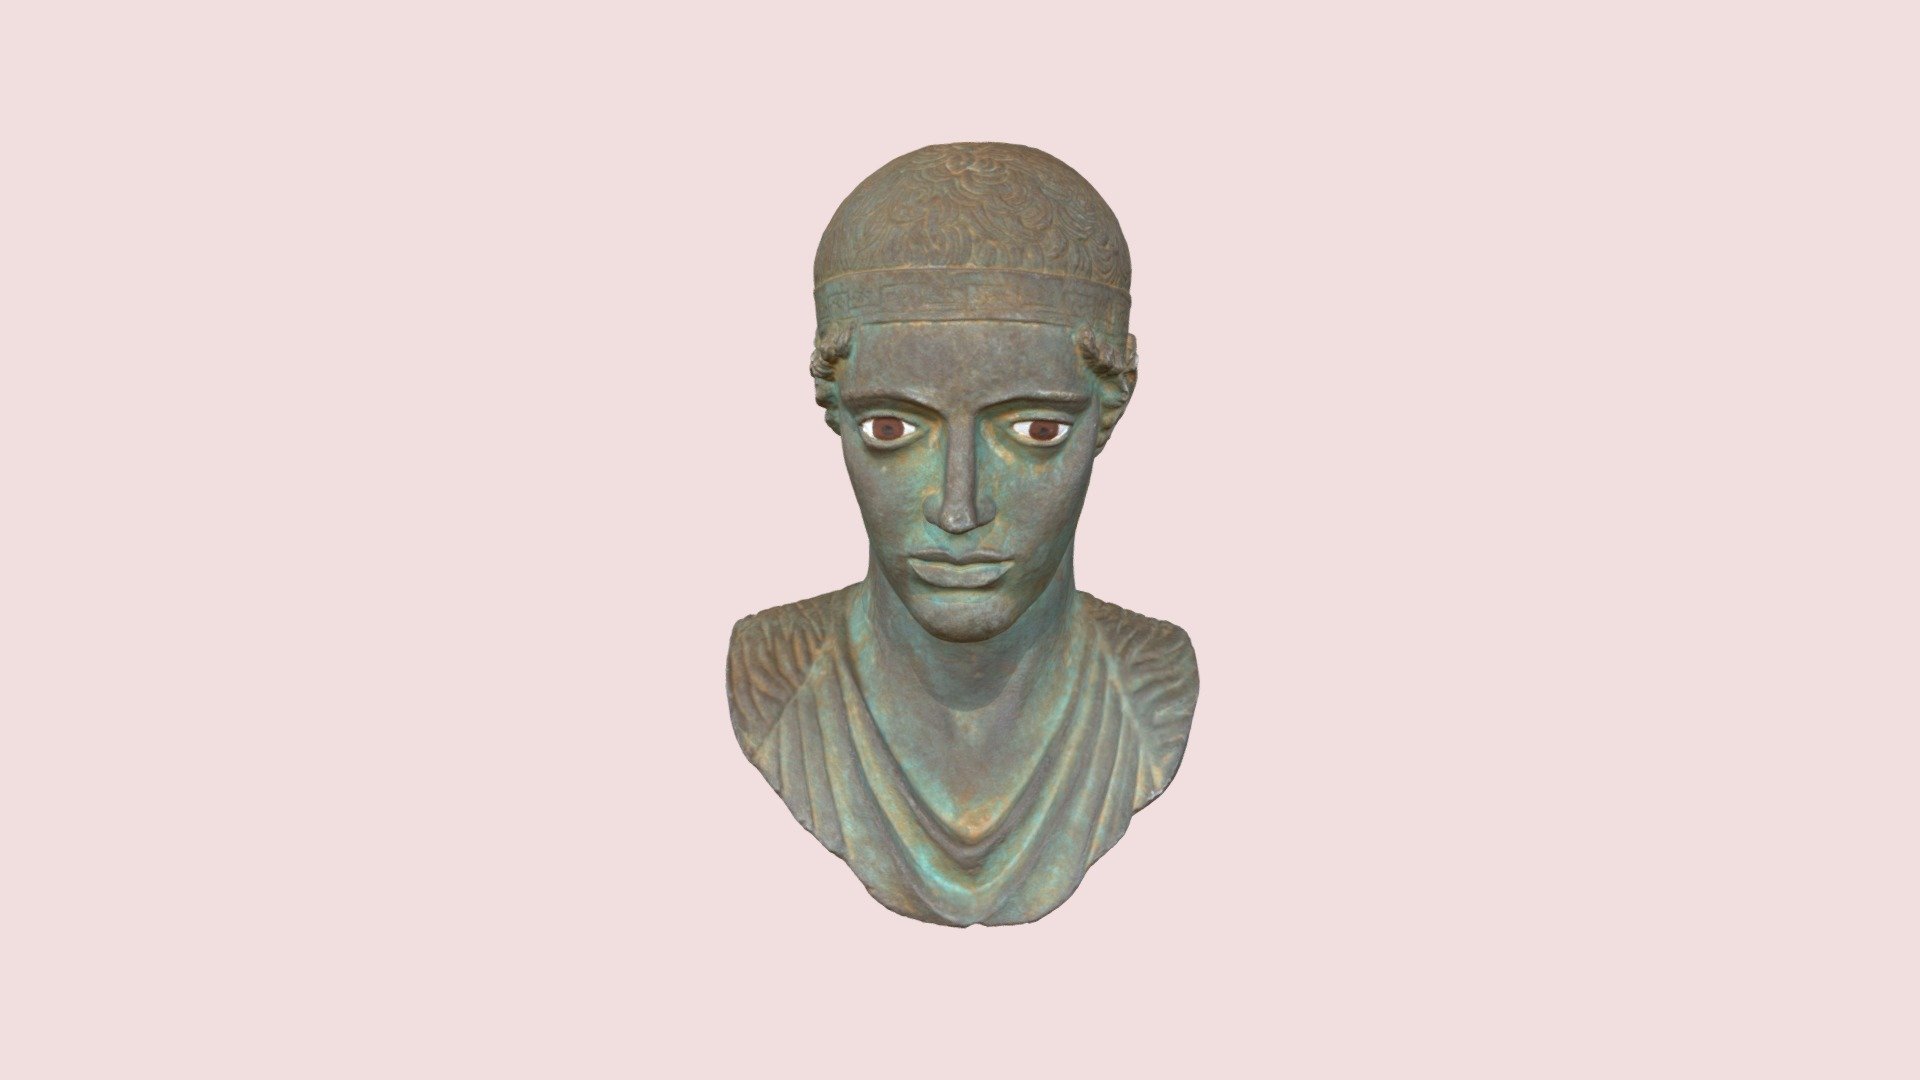 The Charioteer of Delphi, also known as Heniokhos (Greek: Ηνίοχος, the rein-holder), is one of the best-known statues surviving from Ancient Greece, and is considered one of the finest examples of ancient bronze sculptures 3d model